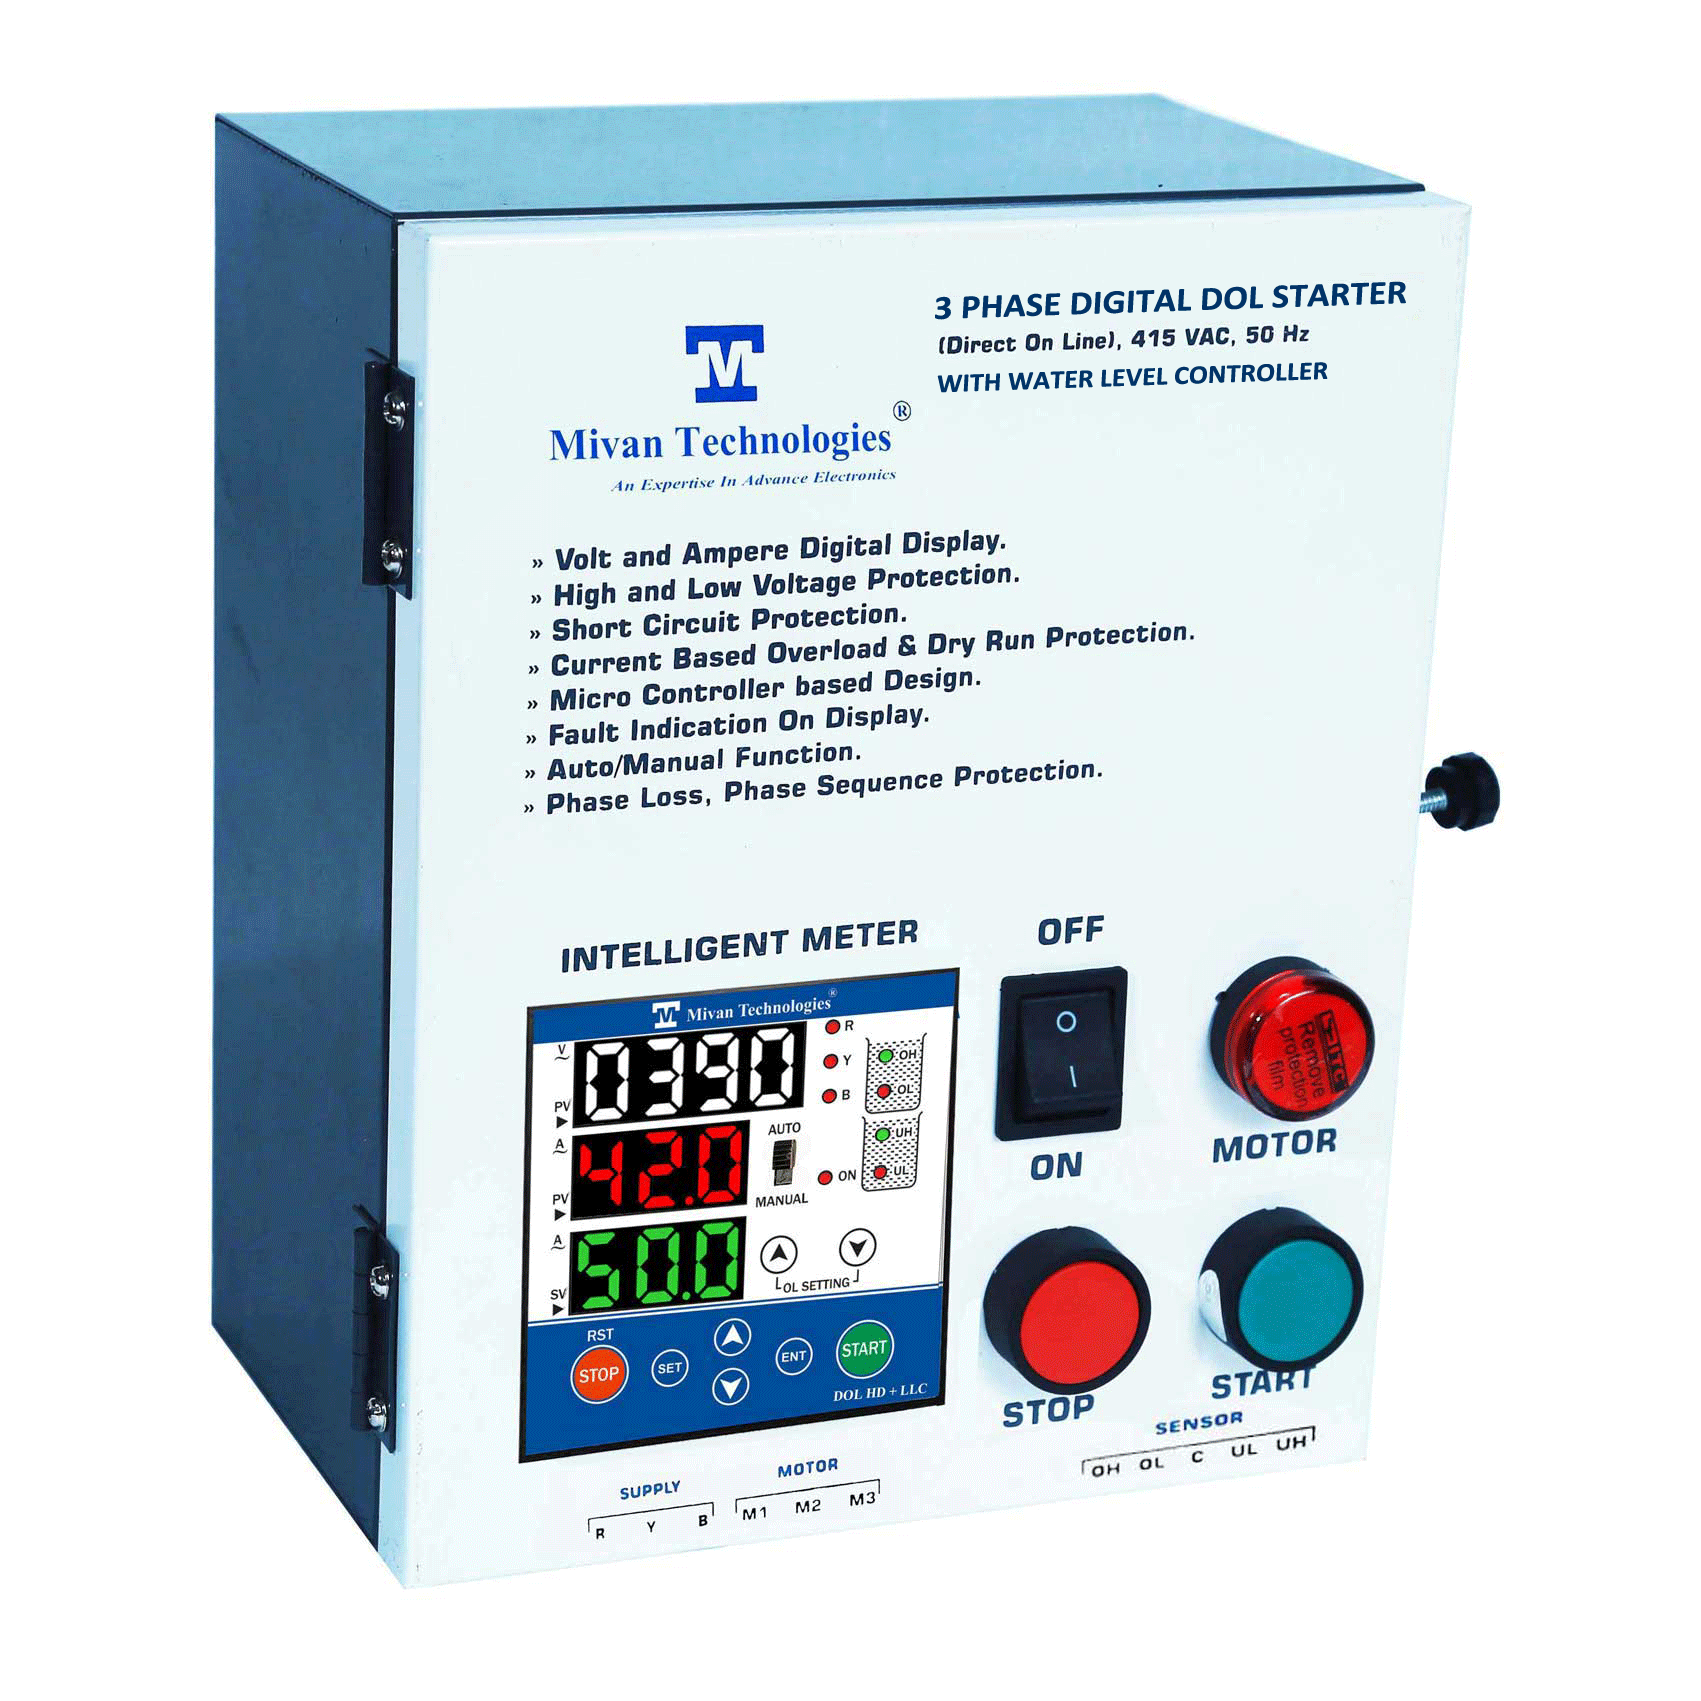 3 phase 3 display Heavy Duty Water level controller with DOL motor starter with HV LV OL Dry protection with Auto switch spp and timer suitable up to 15 hp DOL HD 3D LLC 32 A